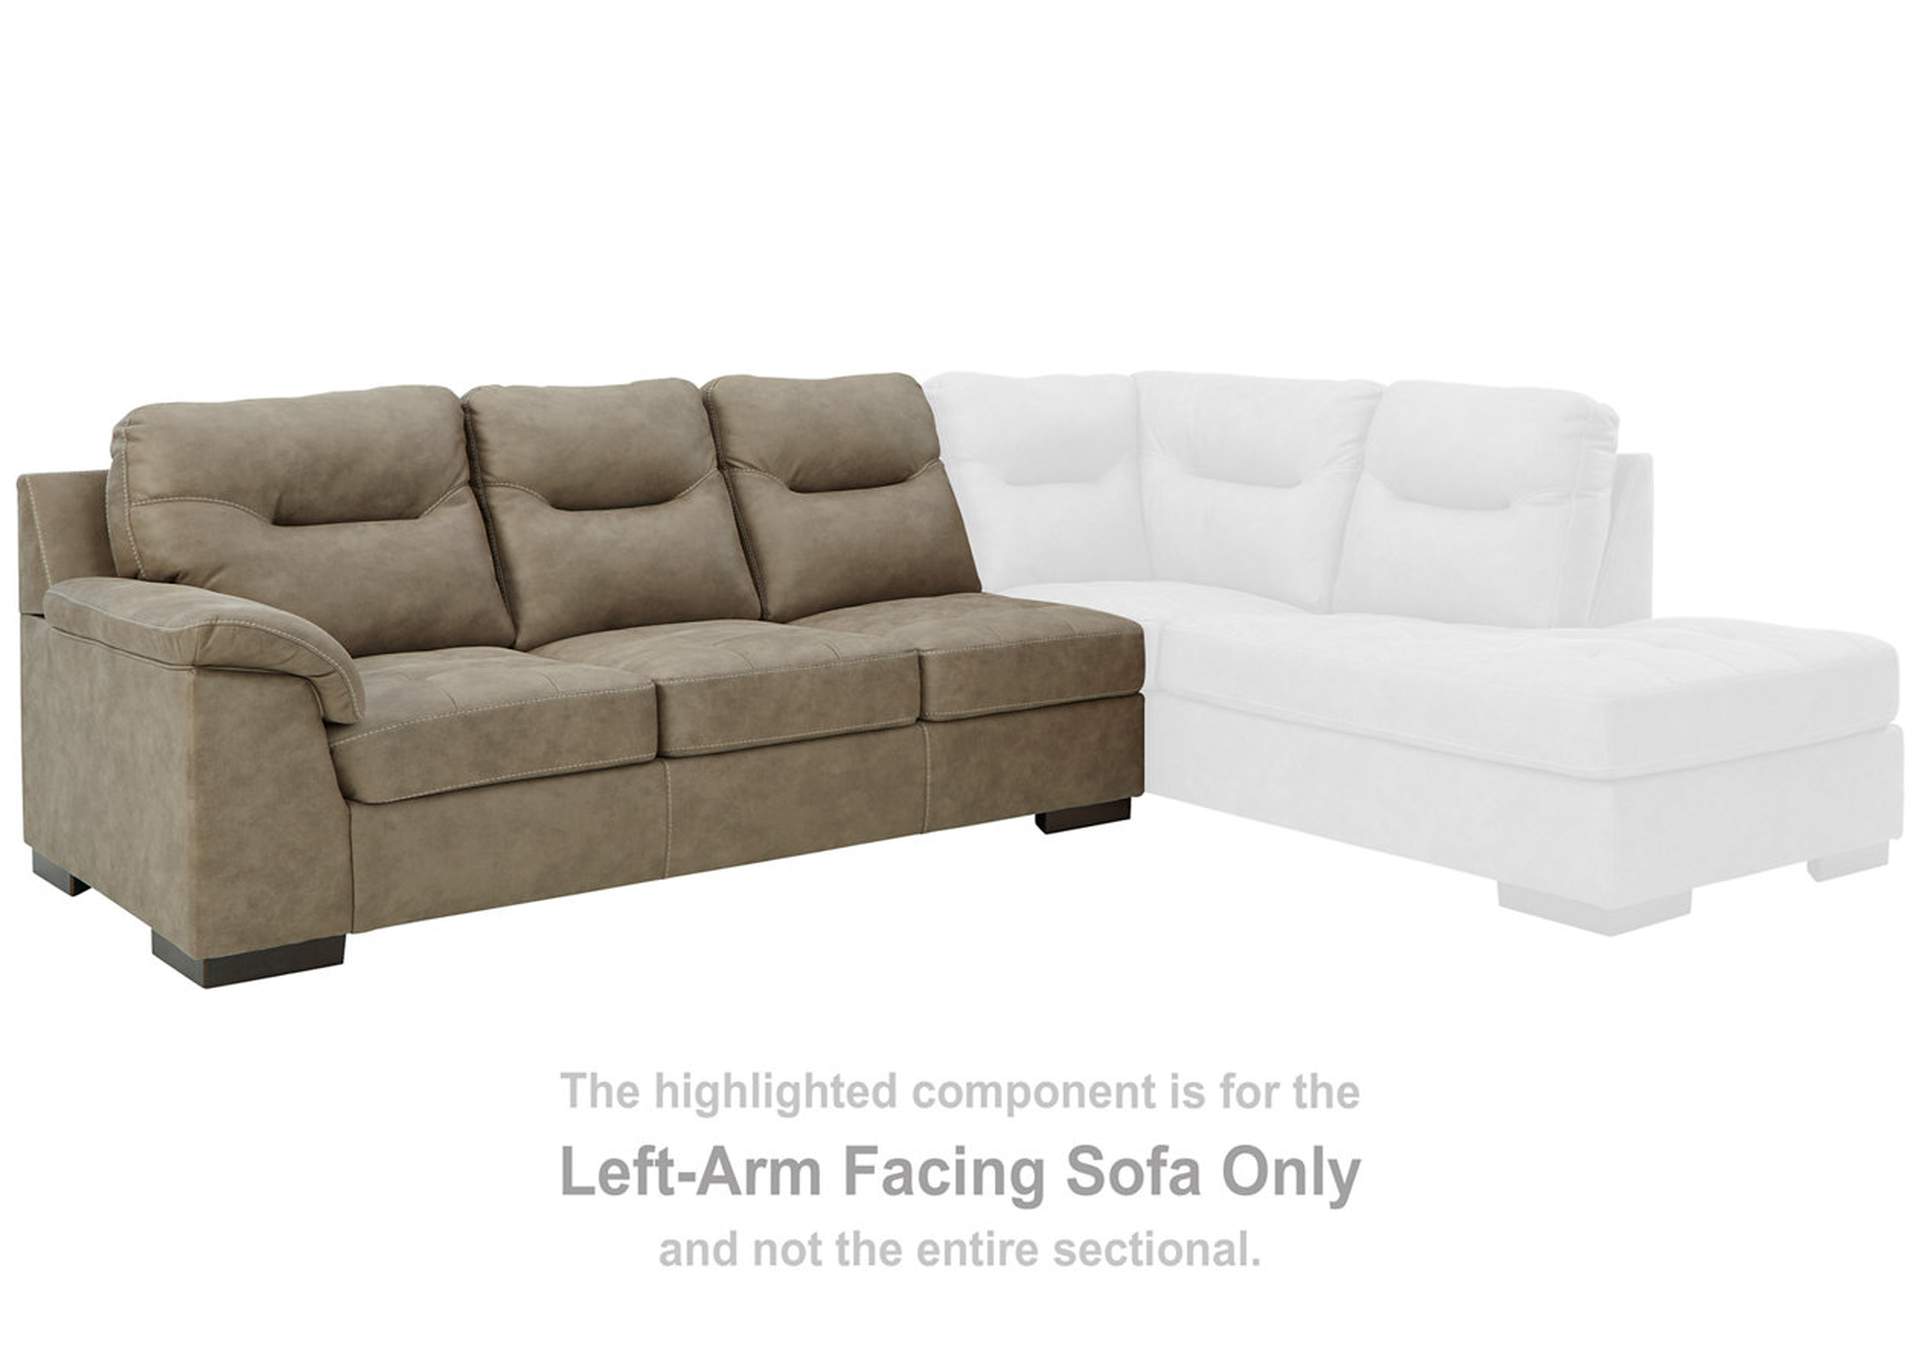 Maderla 2-Piece Sectional with Chaise,Signature Design By Ashley